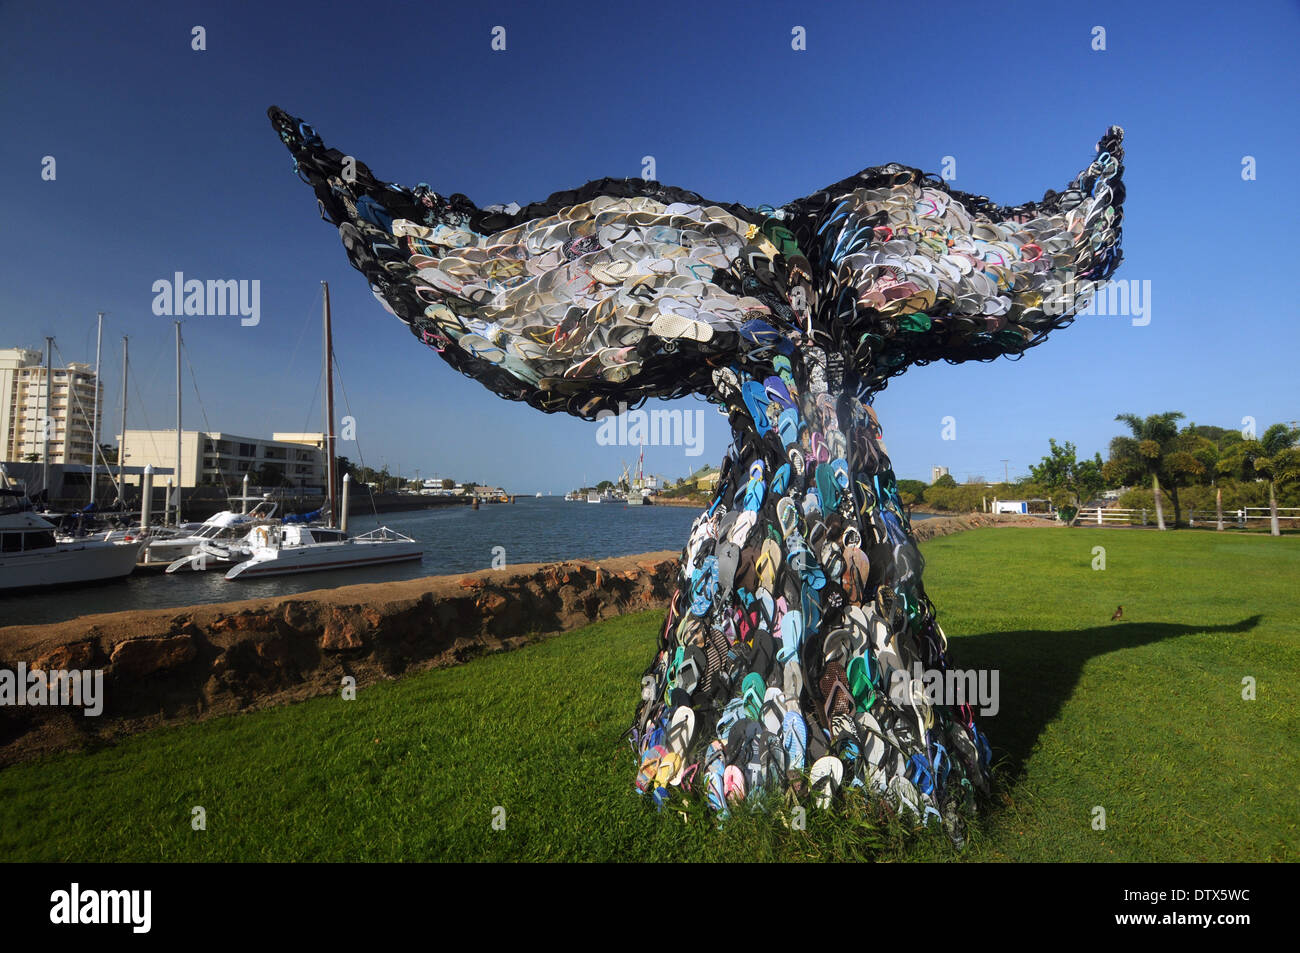 Art from beach litter - whale tail made of recycled flip-flops (thongs) by the marina, Townsville, Queensland, Australia. No PR Stock Photo